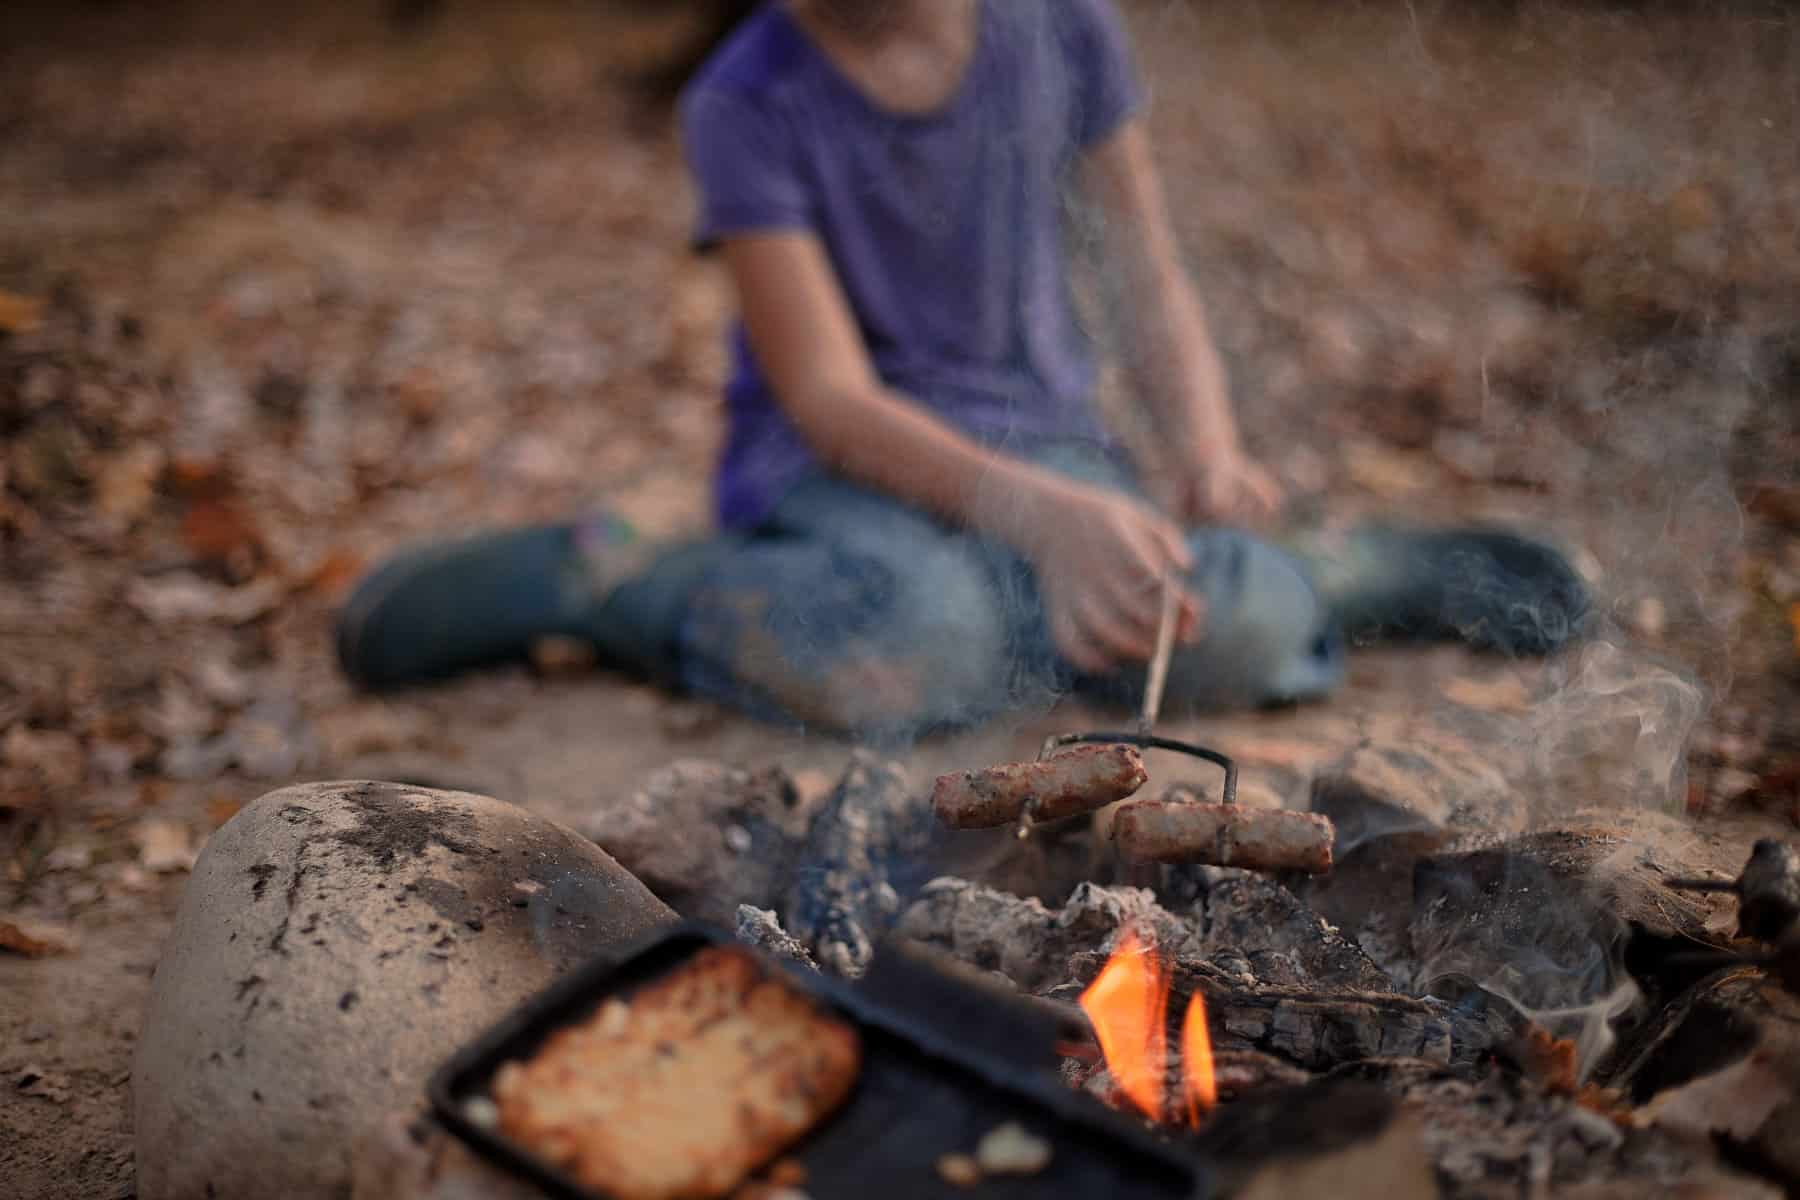 The Best Campfire Cooking Essentials to Bring on Your Next Camping Trip